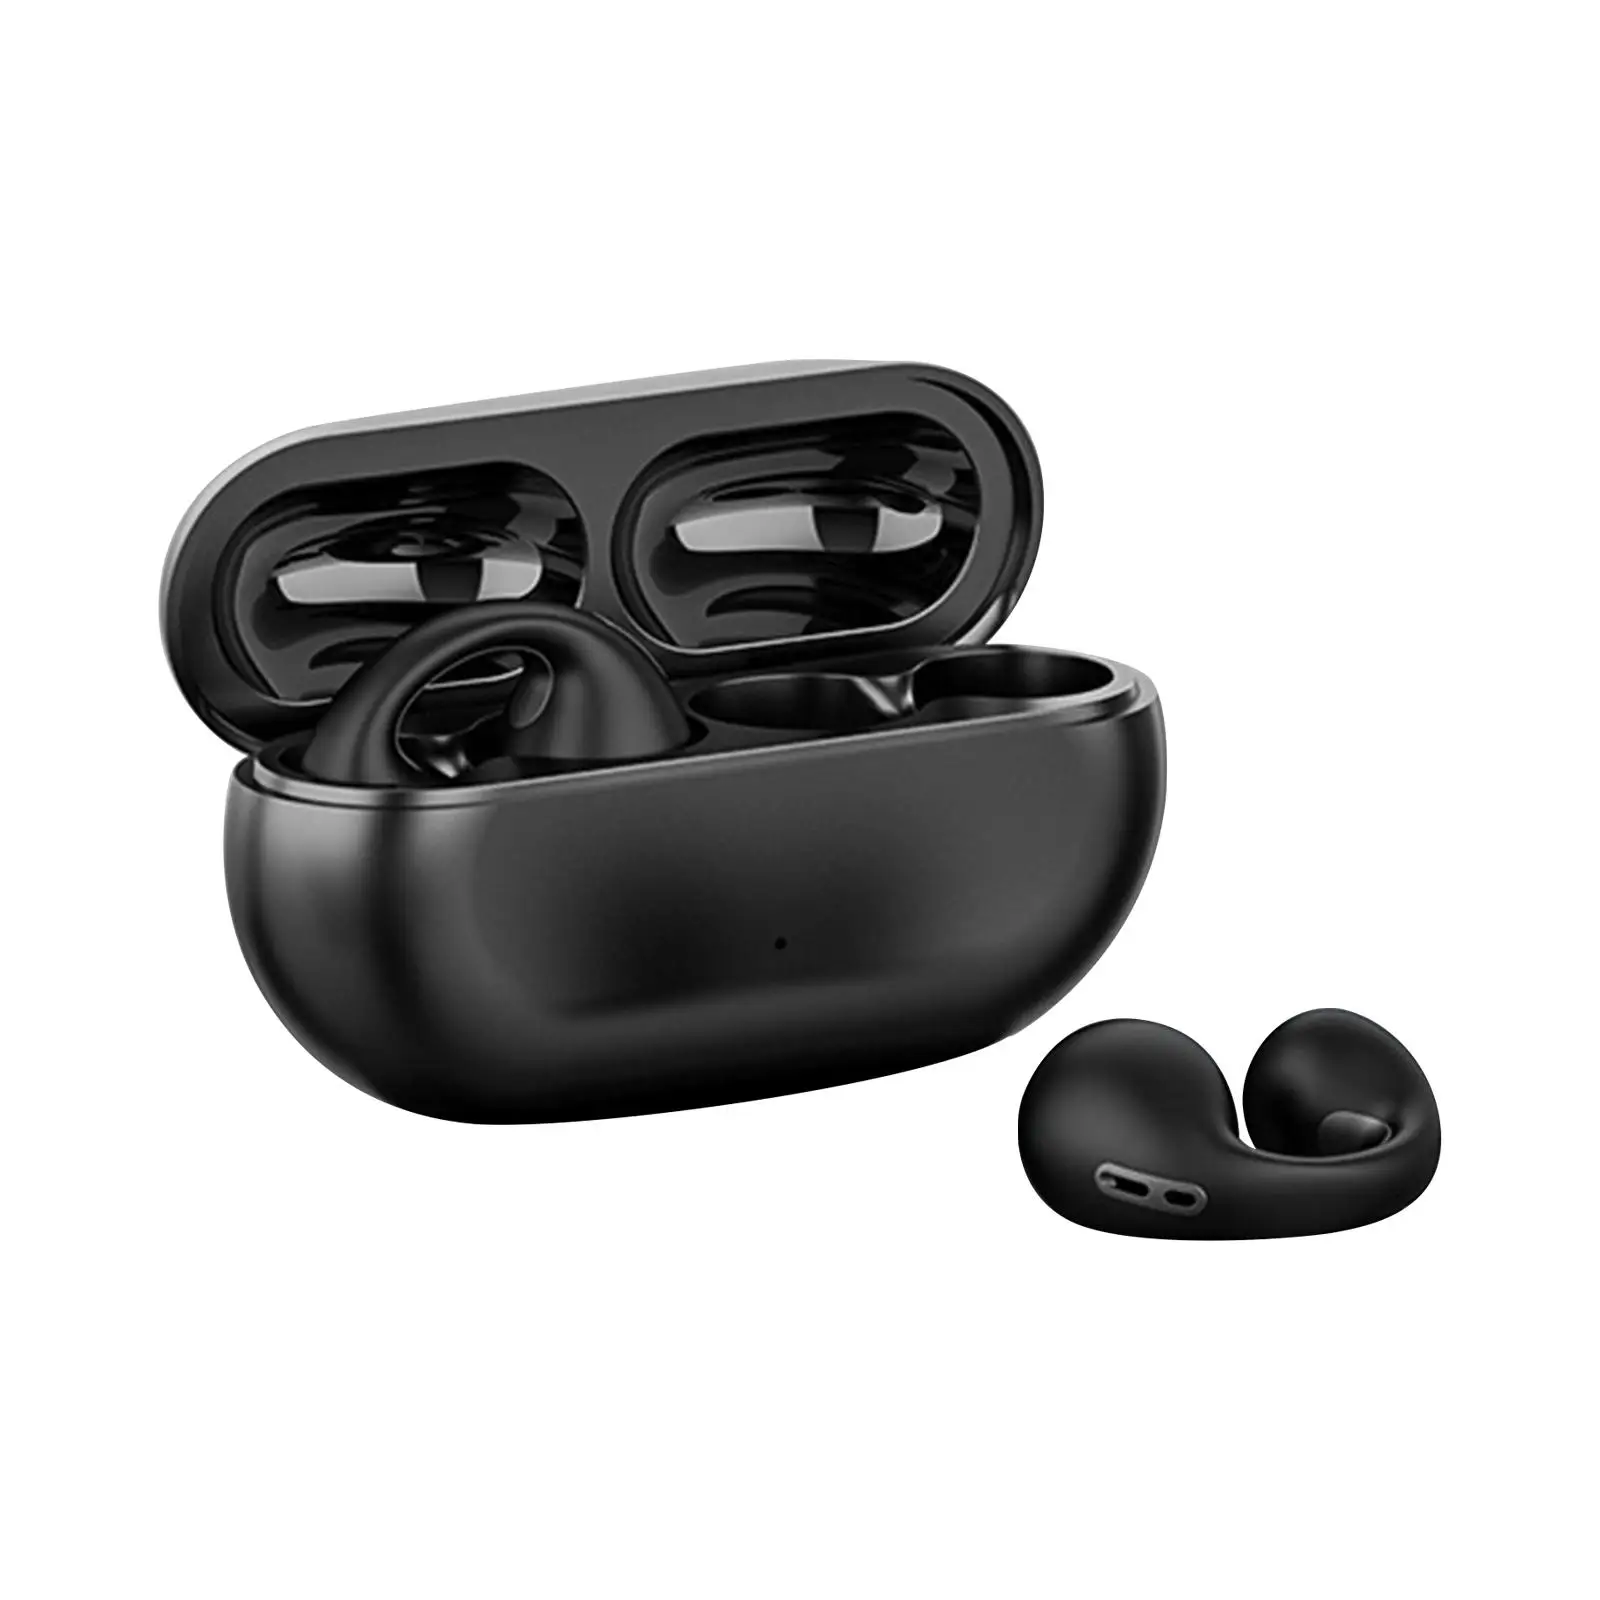 Clip On Wireless Earphones HiFi Sound Comfortable to Wear Sport Earbuds Earpiece for Running Workout Business Fitness Driving